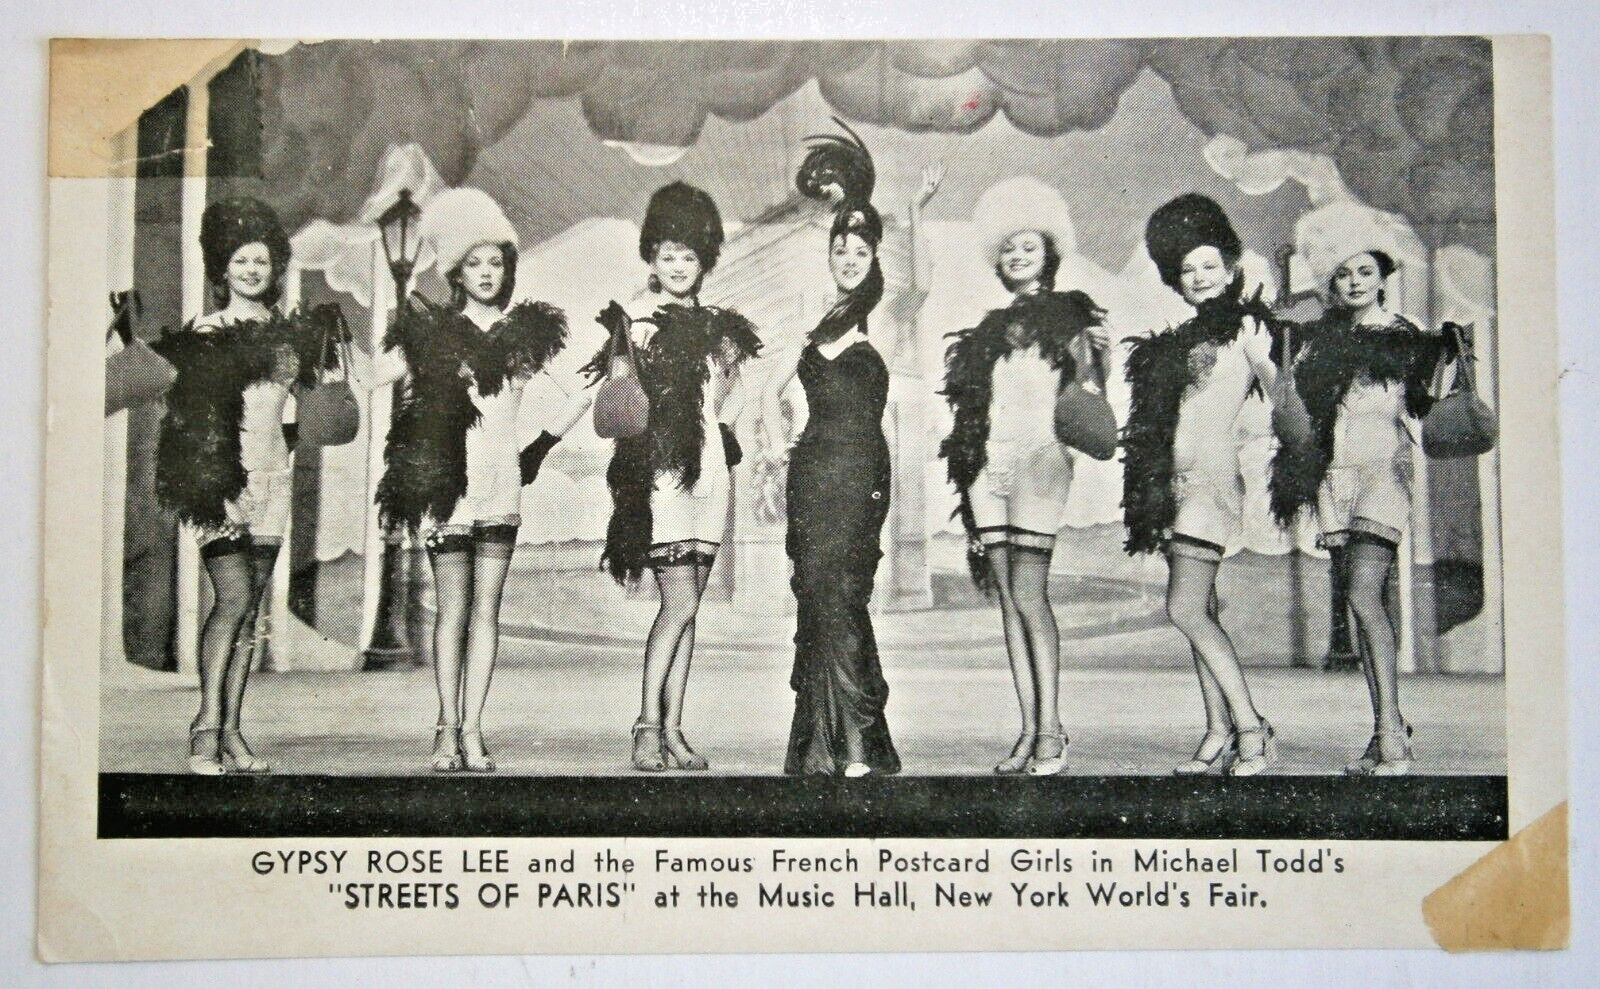 Photo of GYPSY ROSE LEE & French Postcard Girls at 1939 NY World's Fair